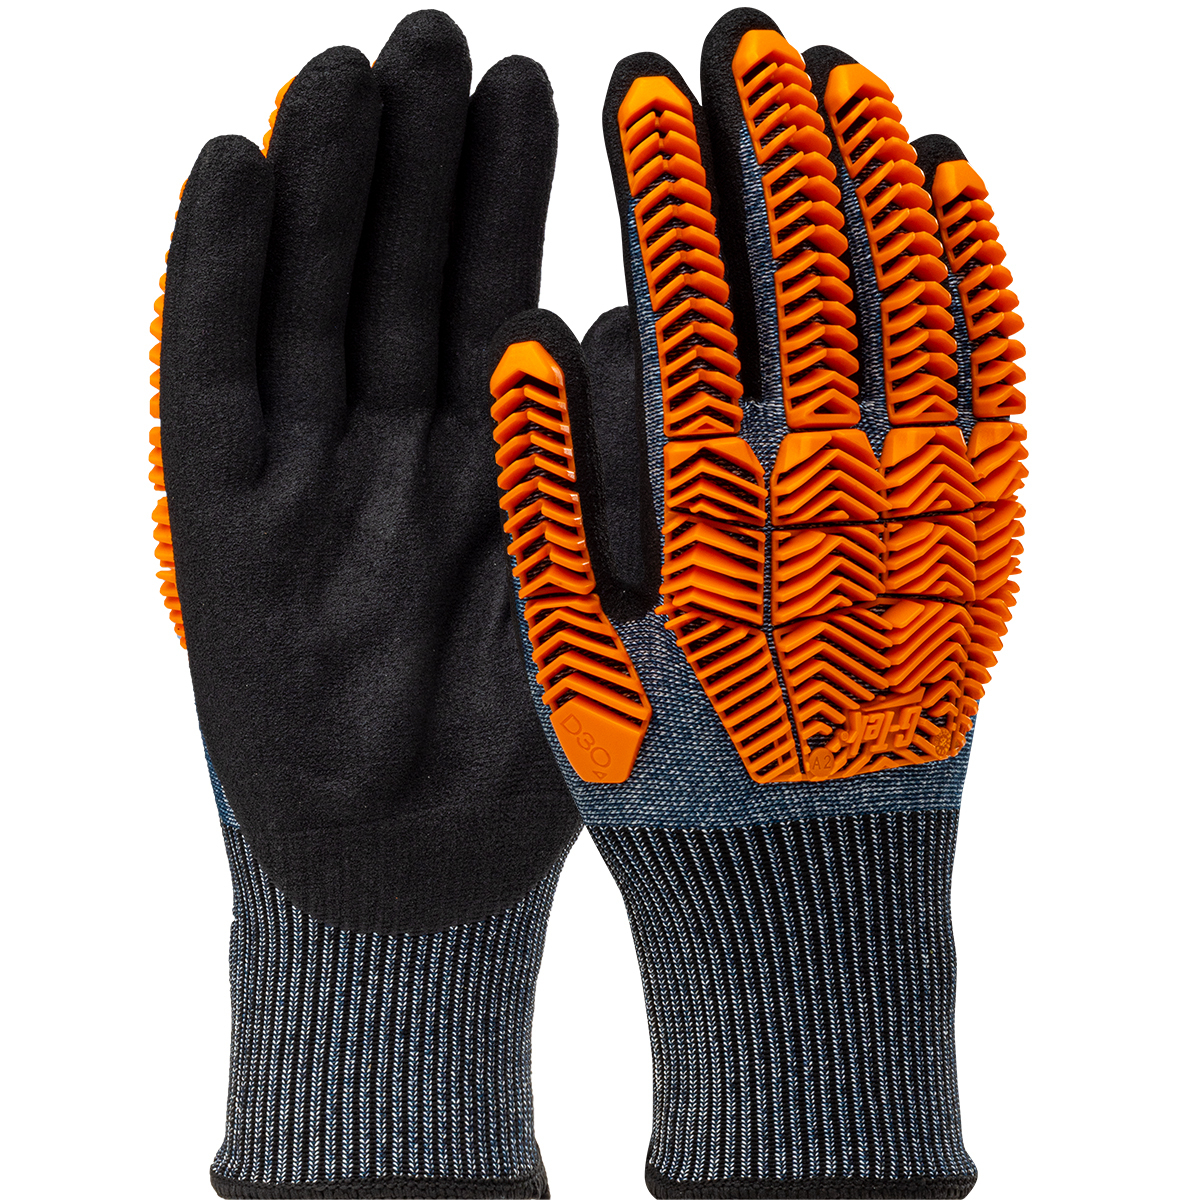 G-TEK POLYKOR D3O IMPACT GLOVE - New Products